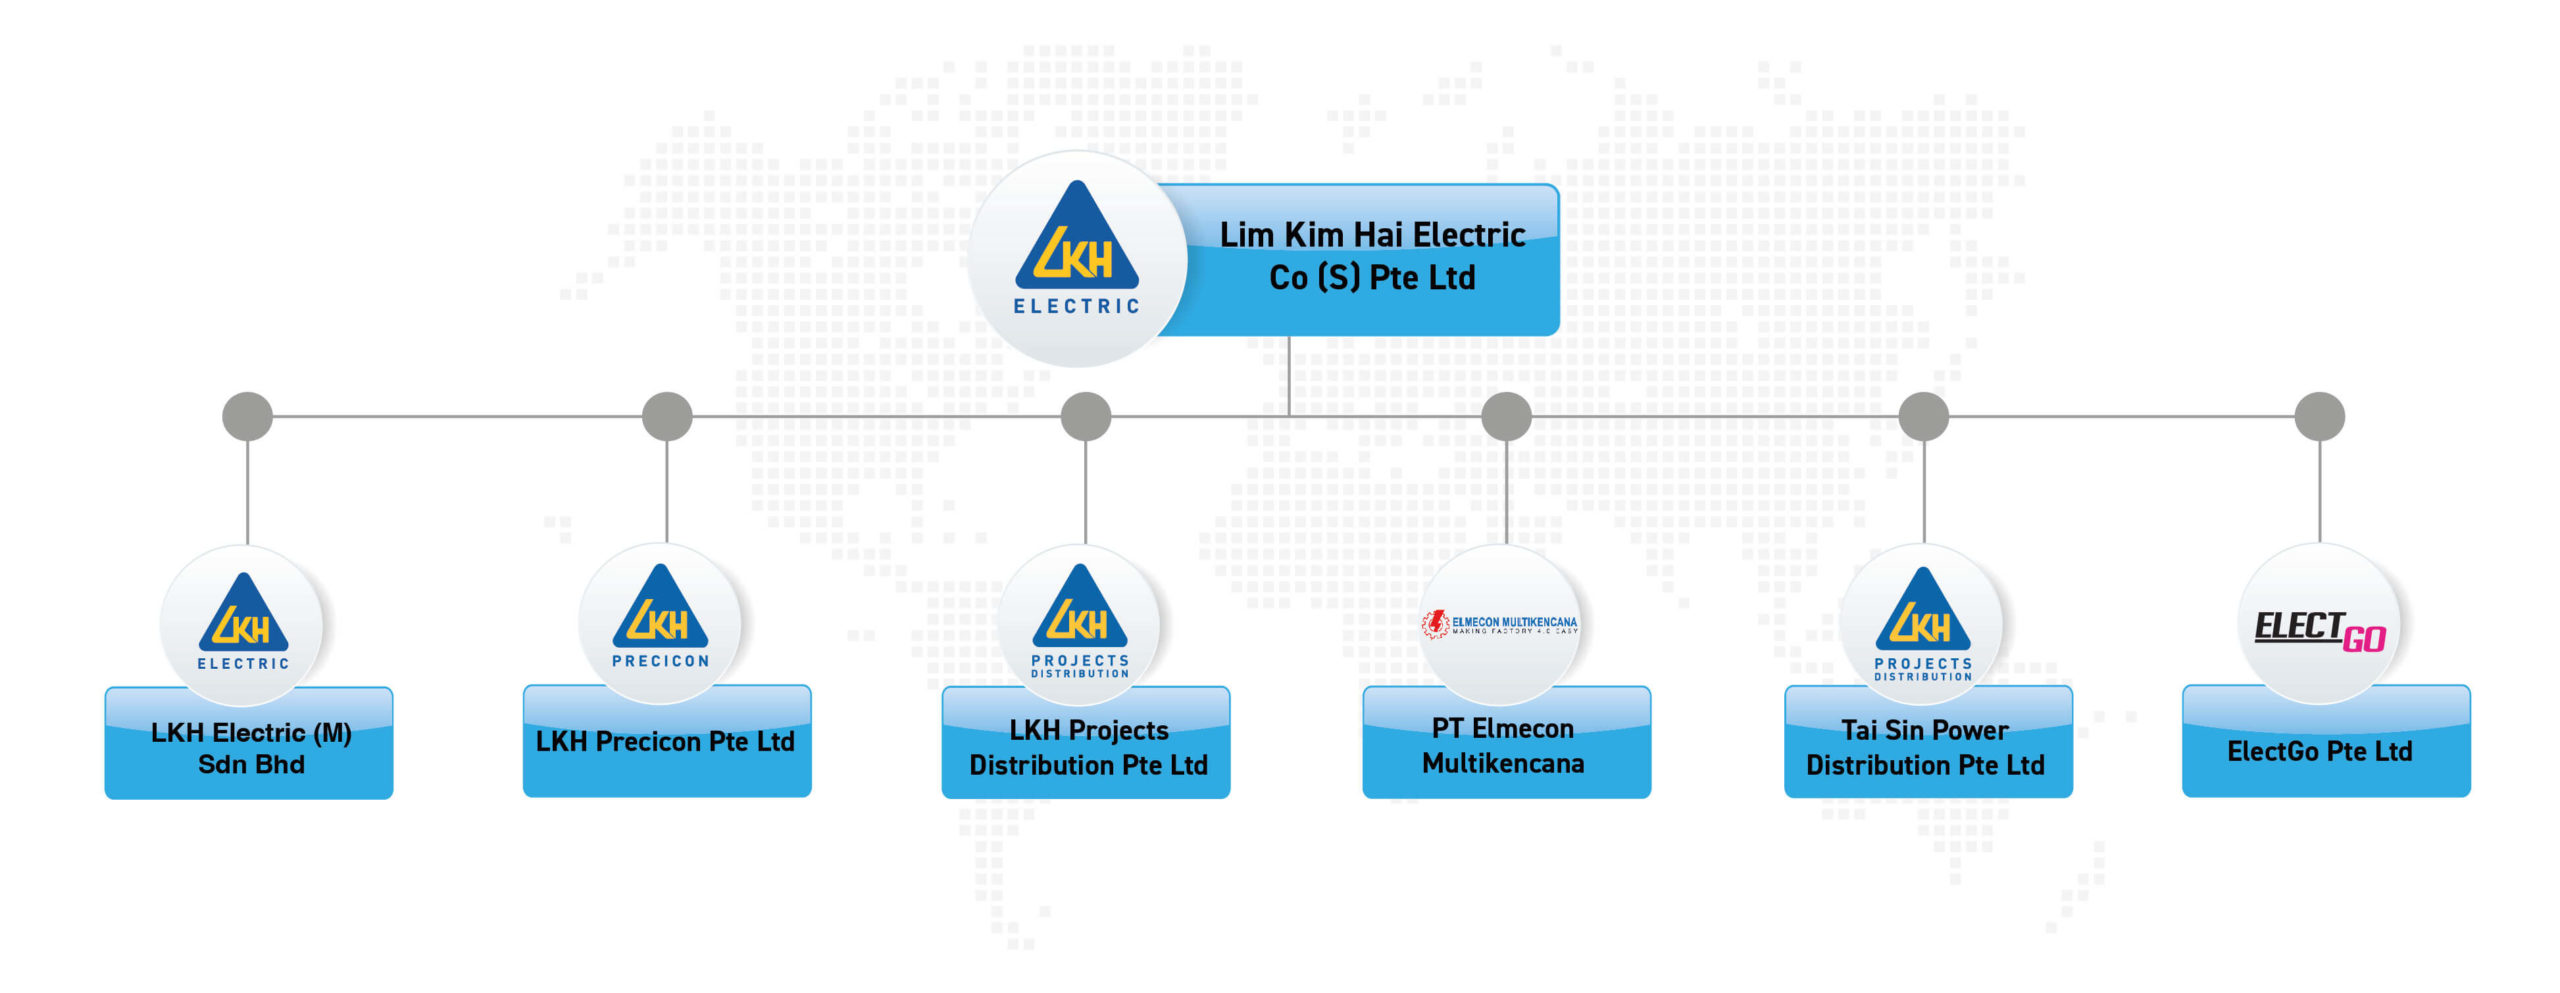 lim kim hai group of companies group structure and global companies. Lim Kim Hai Group of companies (LKHGC) is the top electric solutions provider in Singapore and southeast asia